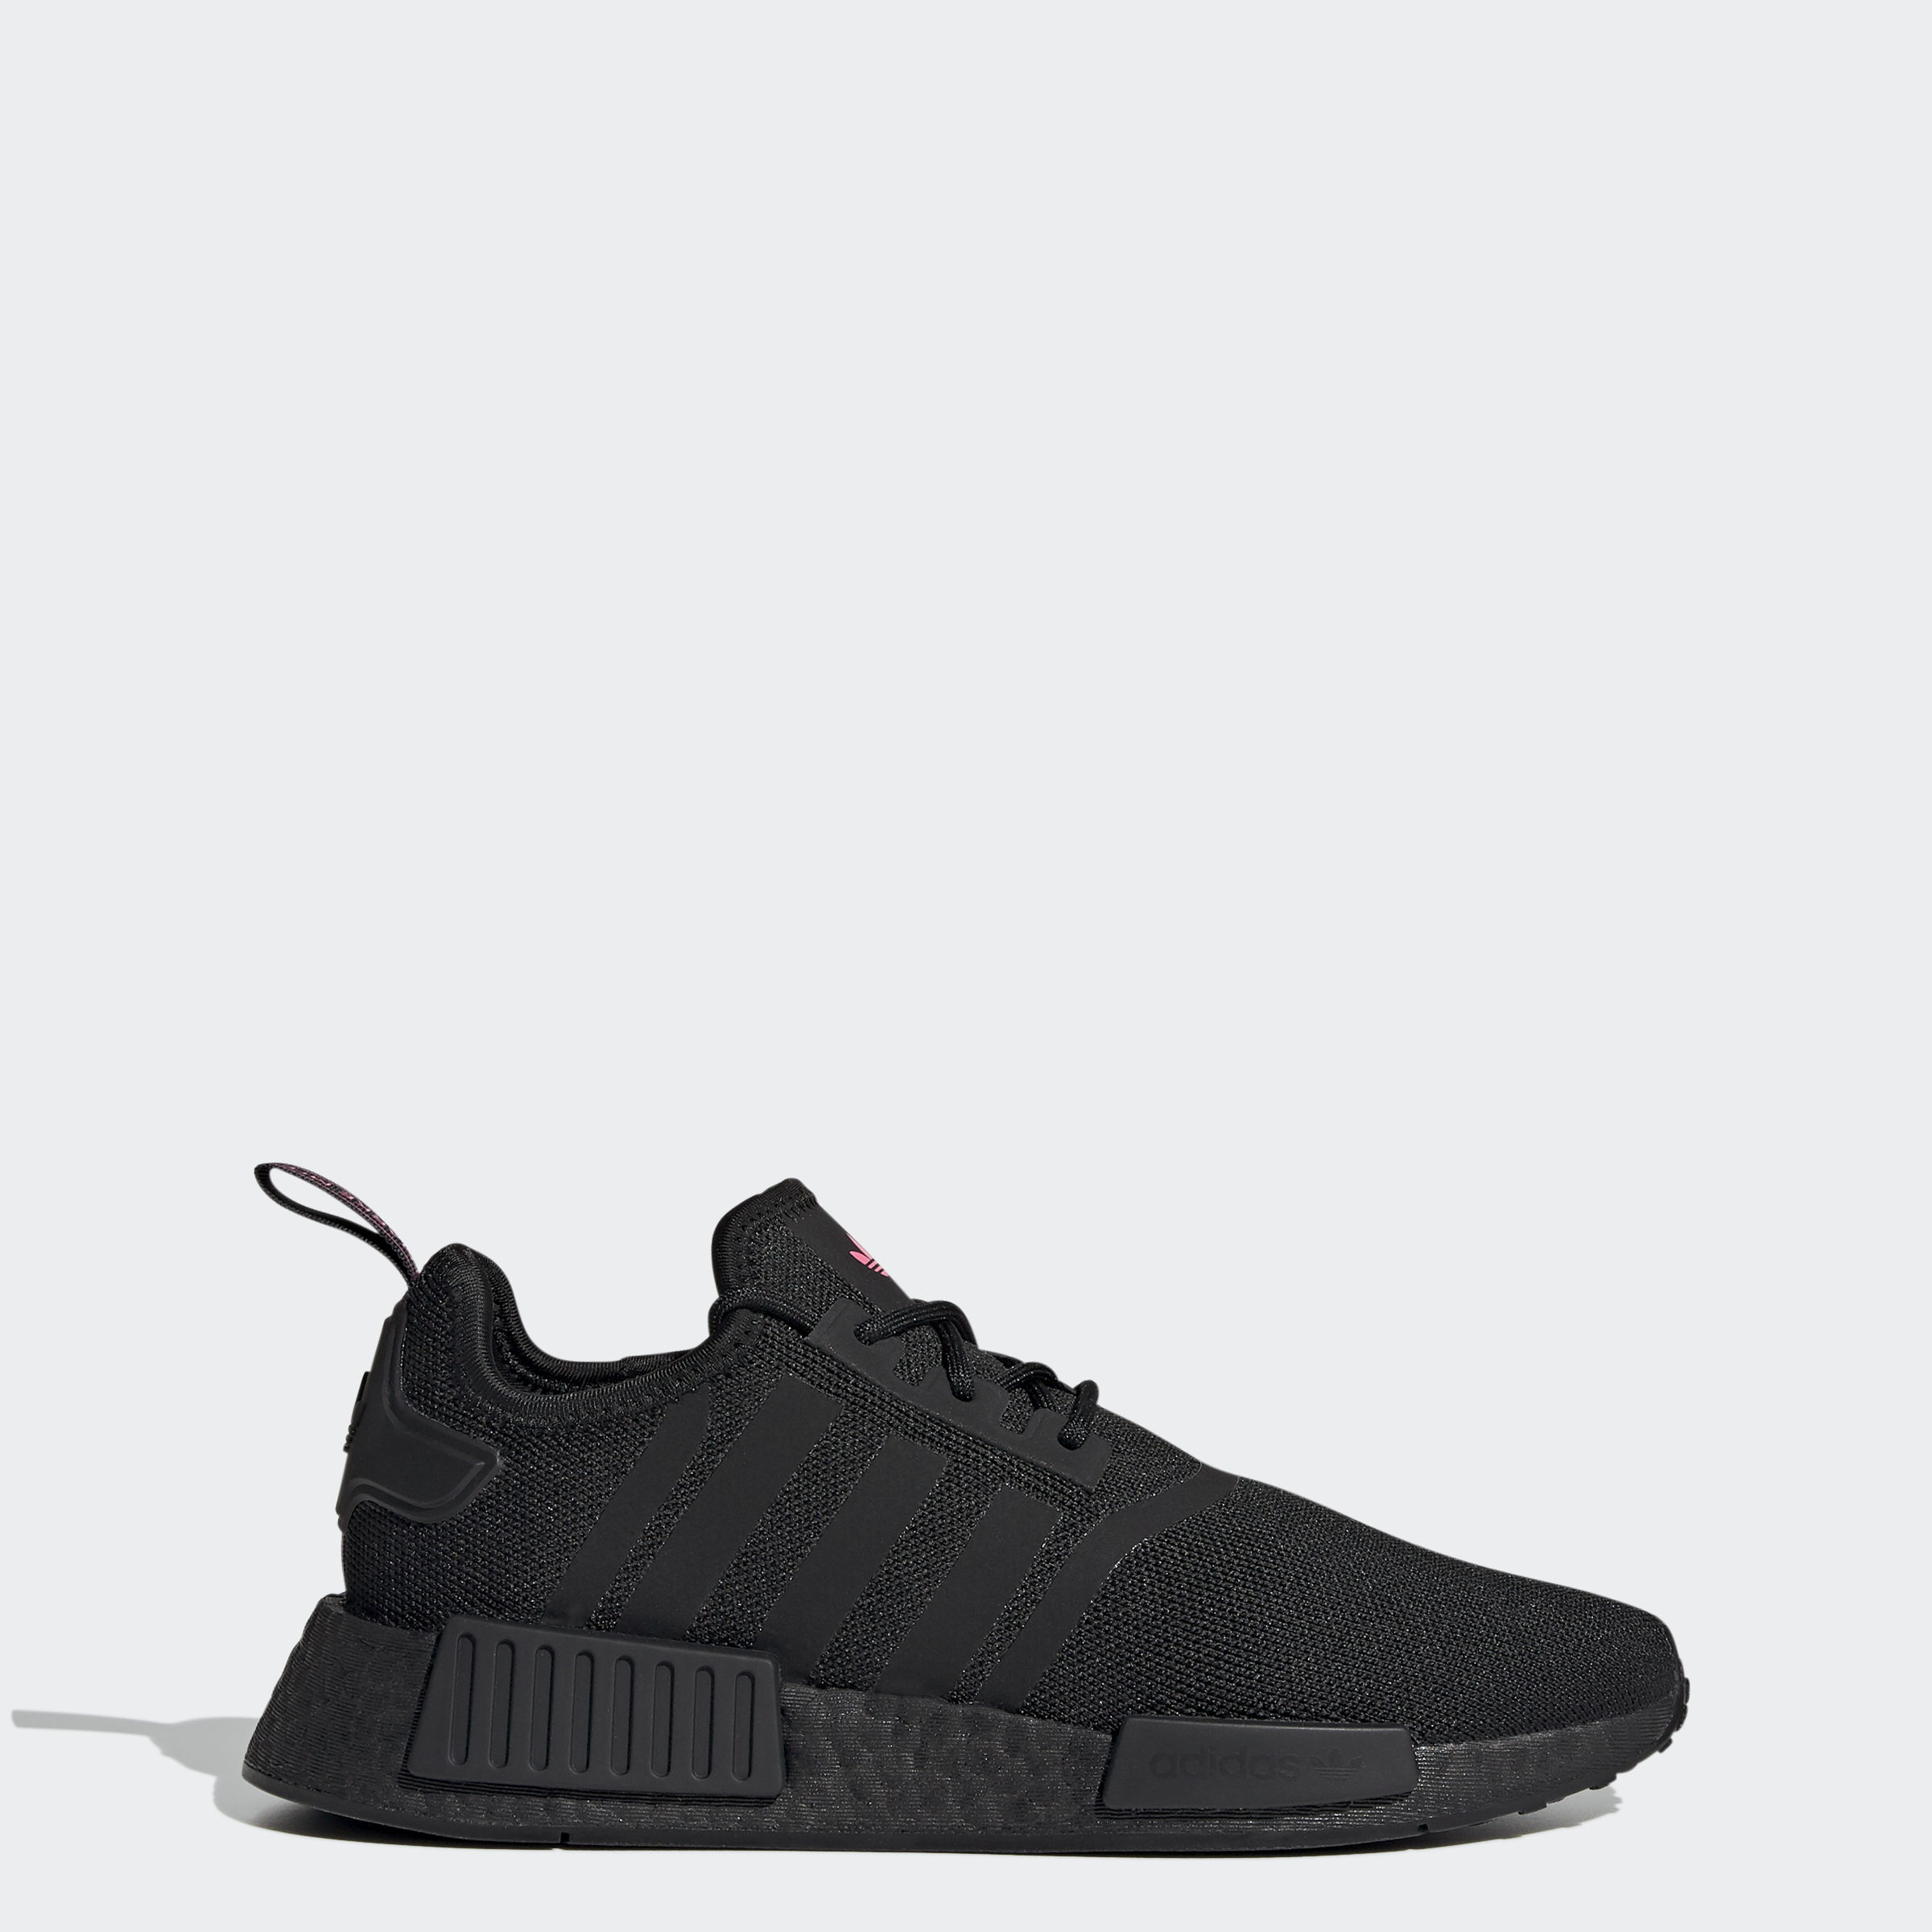 adidas Women's NMD_R1 Shoes (Core Black / Core Black / Solar Pink) $31.20 + Free Shipping